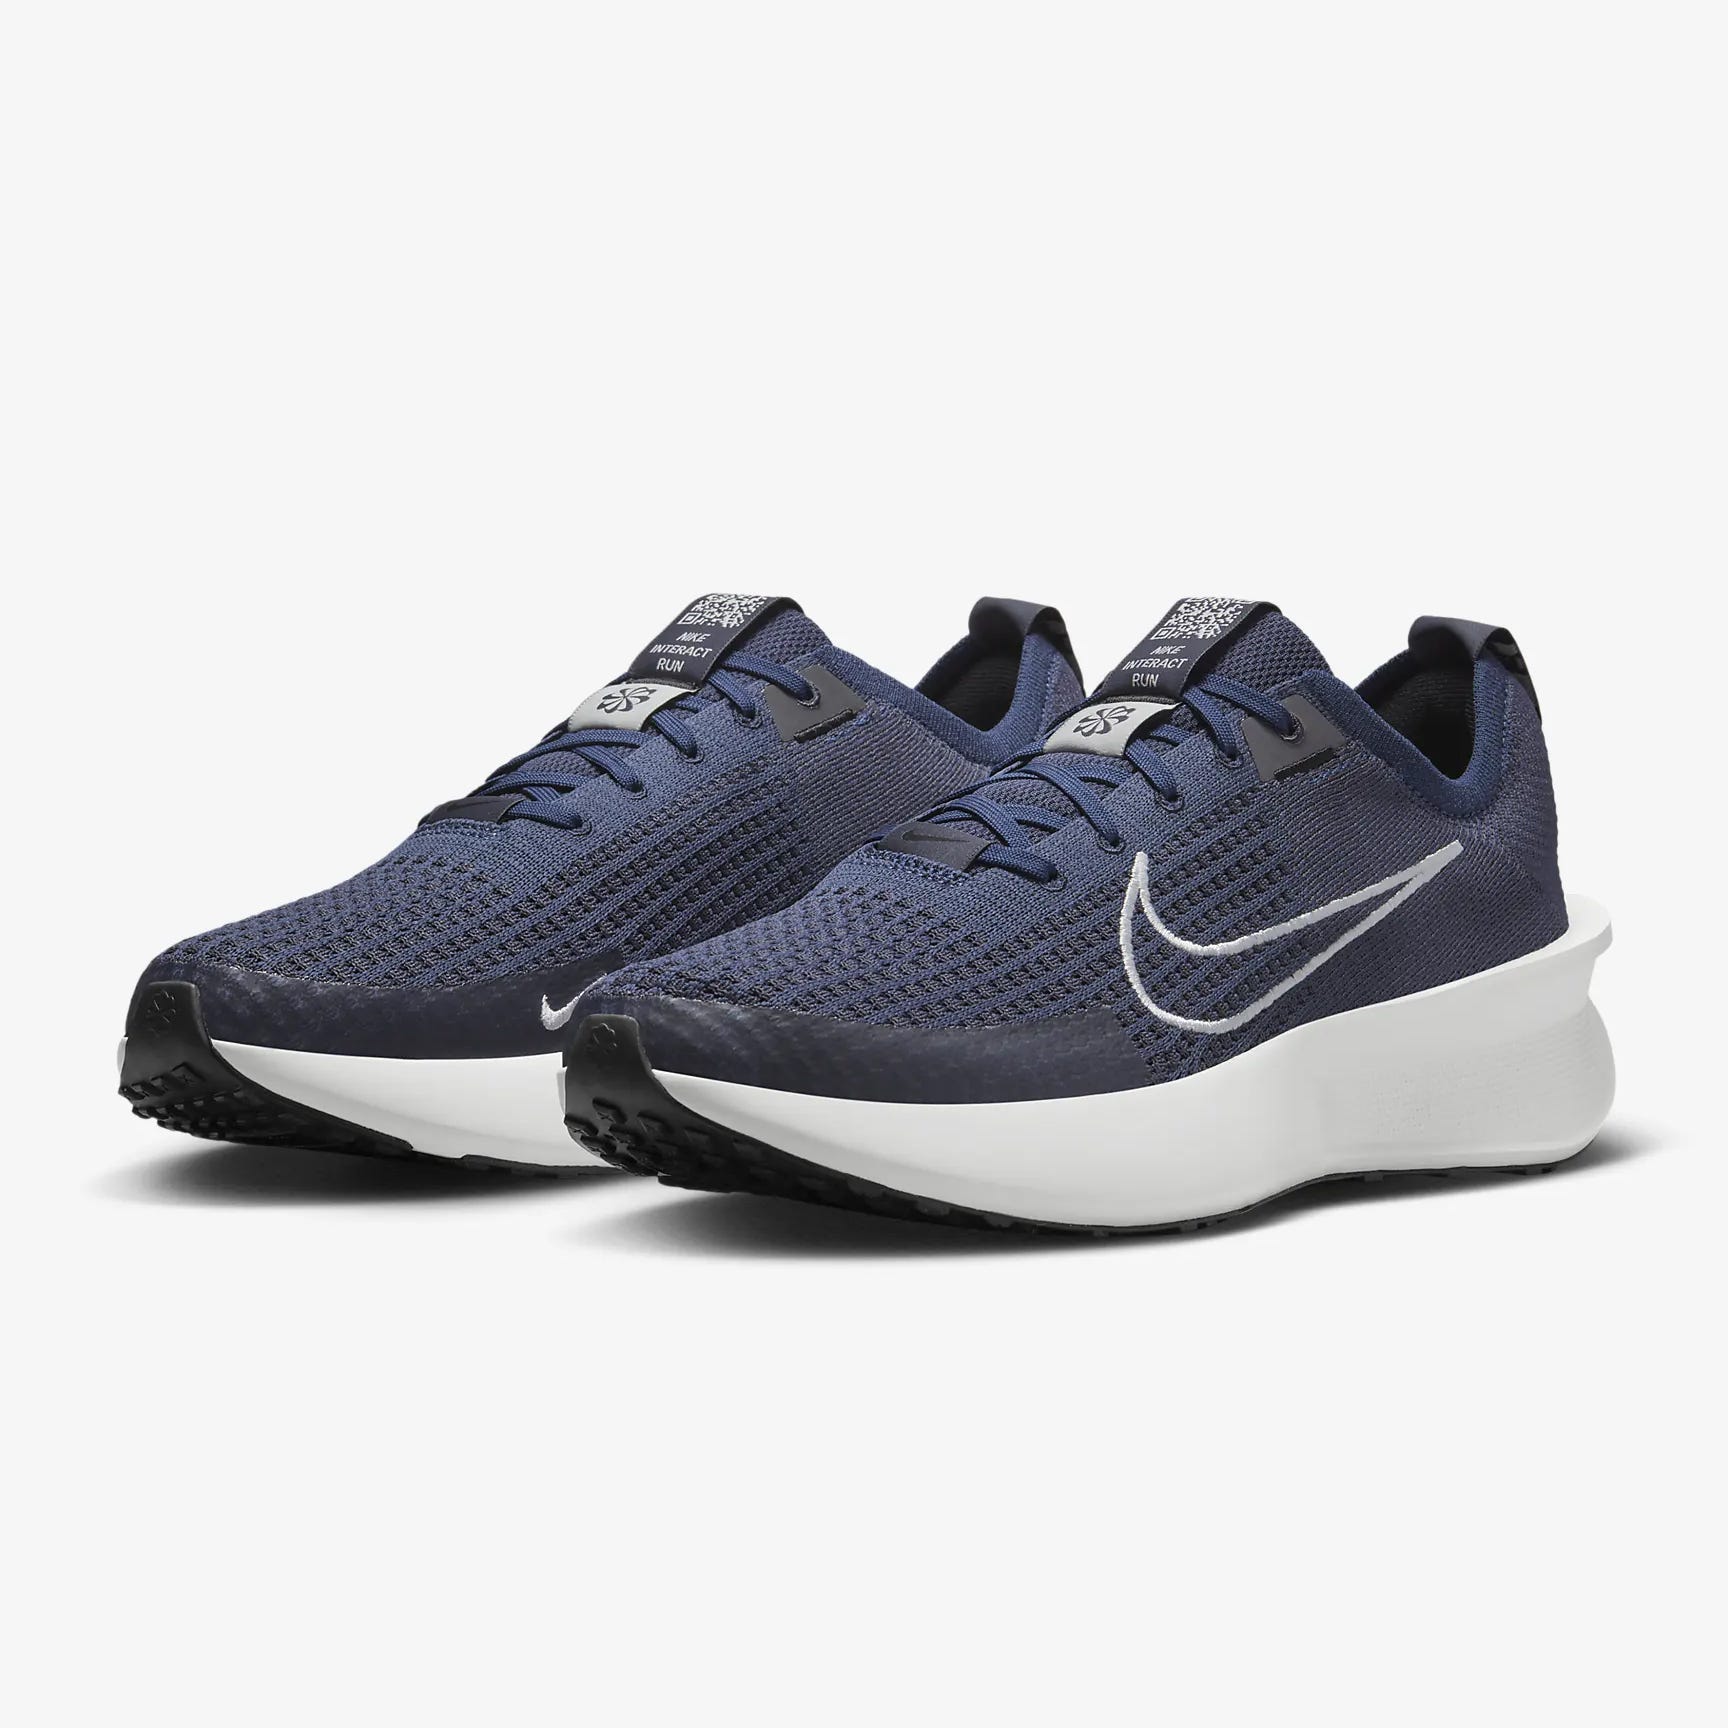 A pair of dark blue running shoes with a white swoosh logo and a white sole.